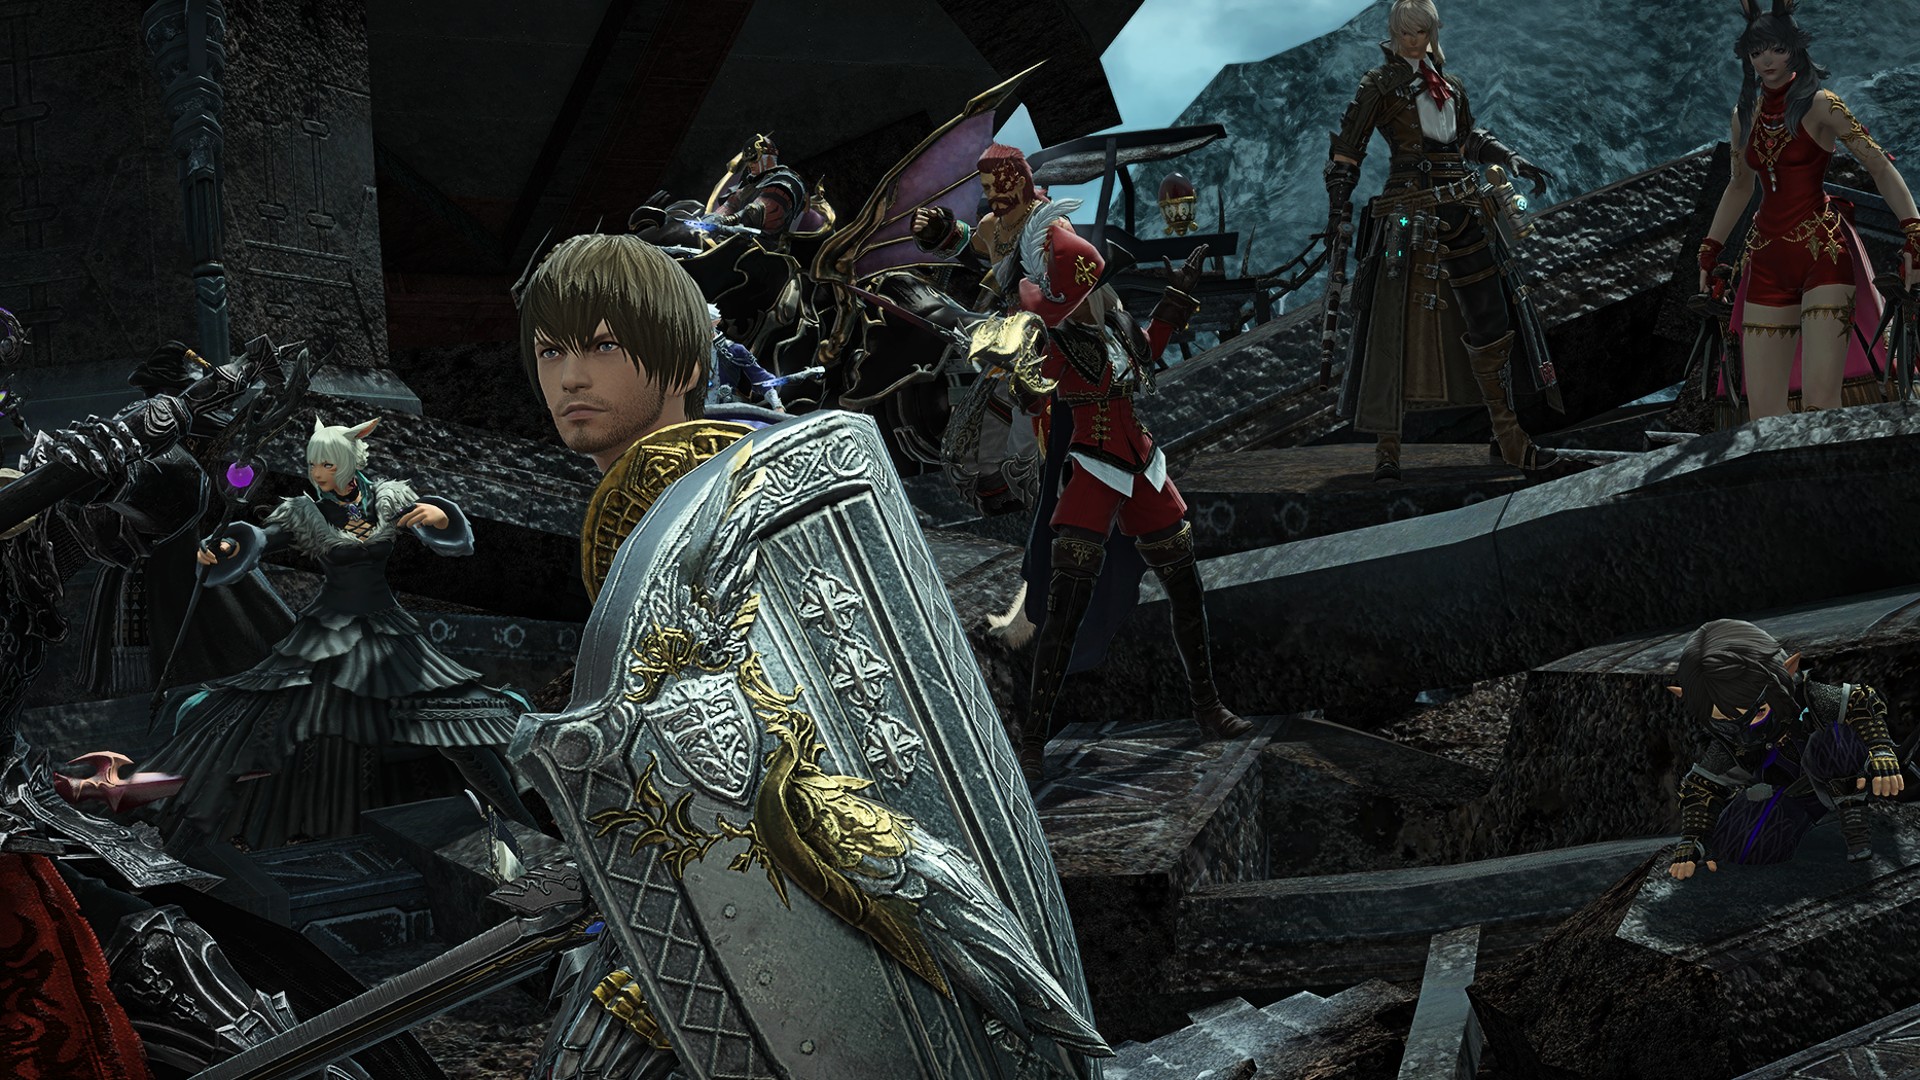 Looks like FFXIV’s next updates could be spelled out next month